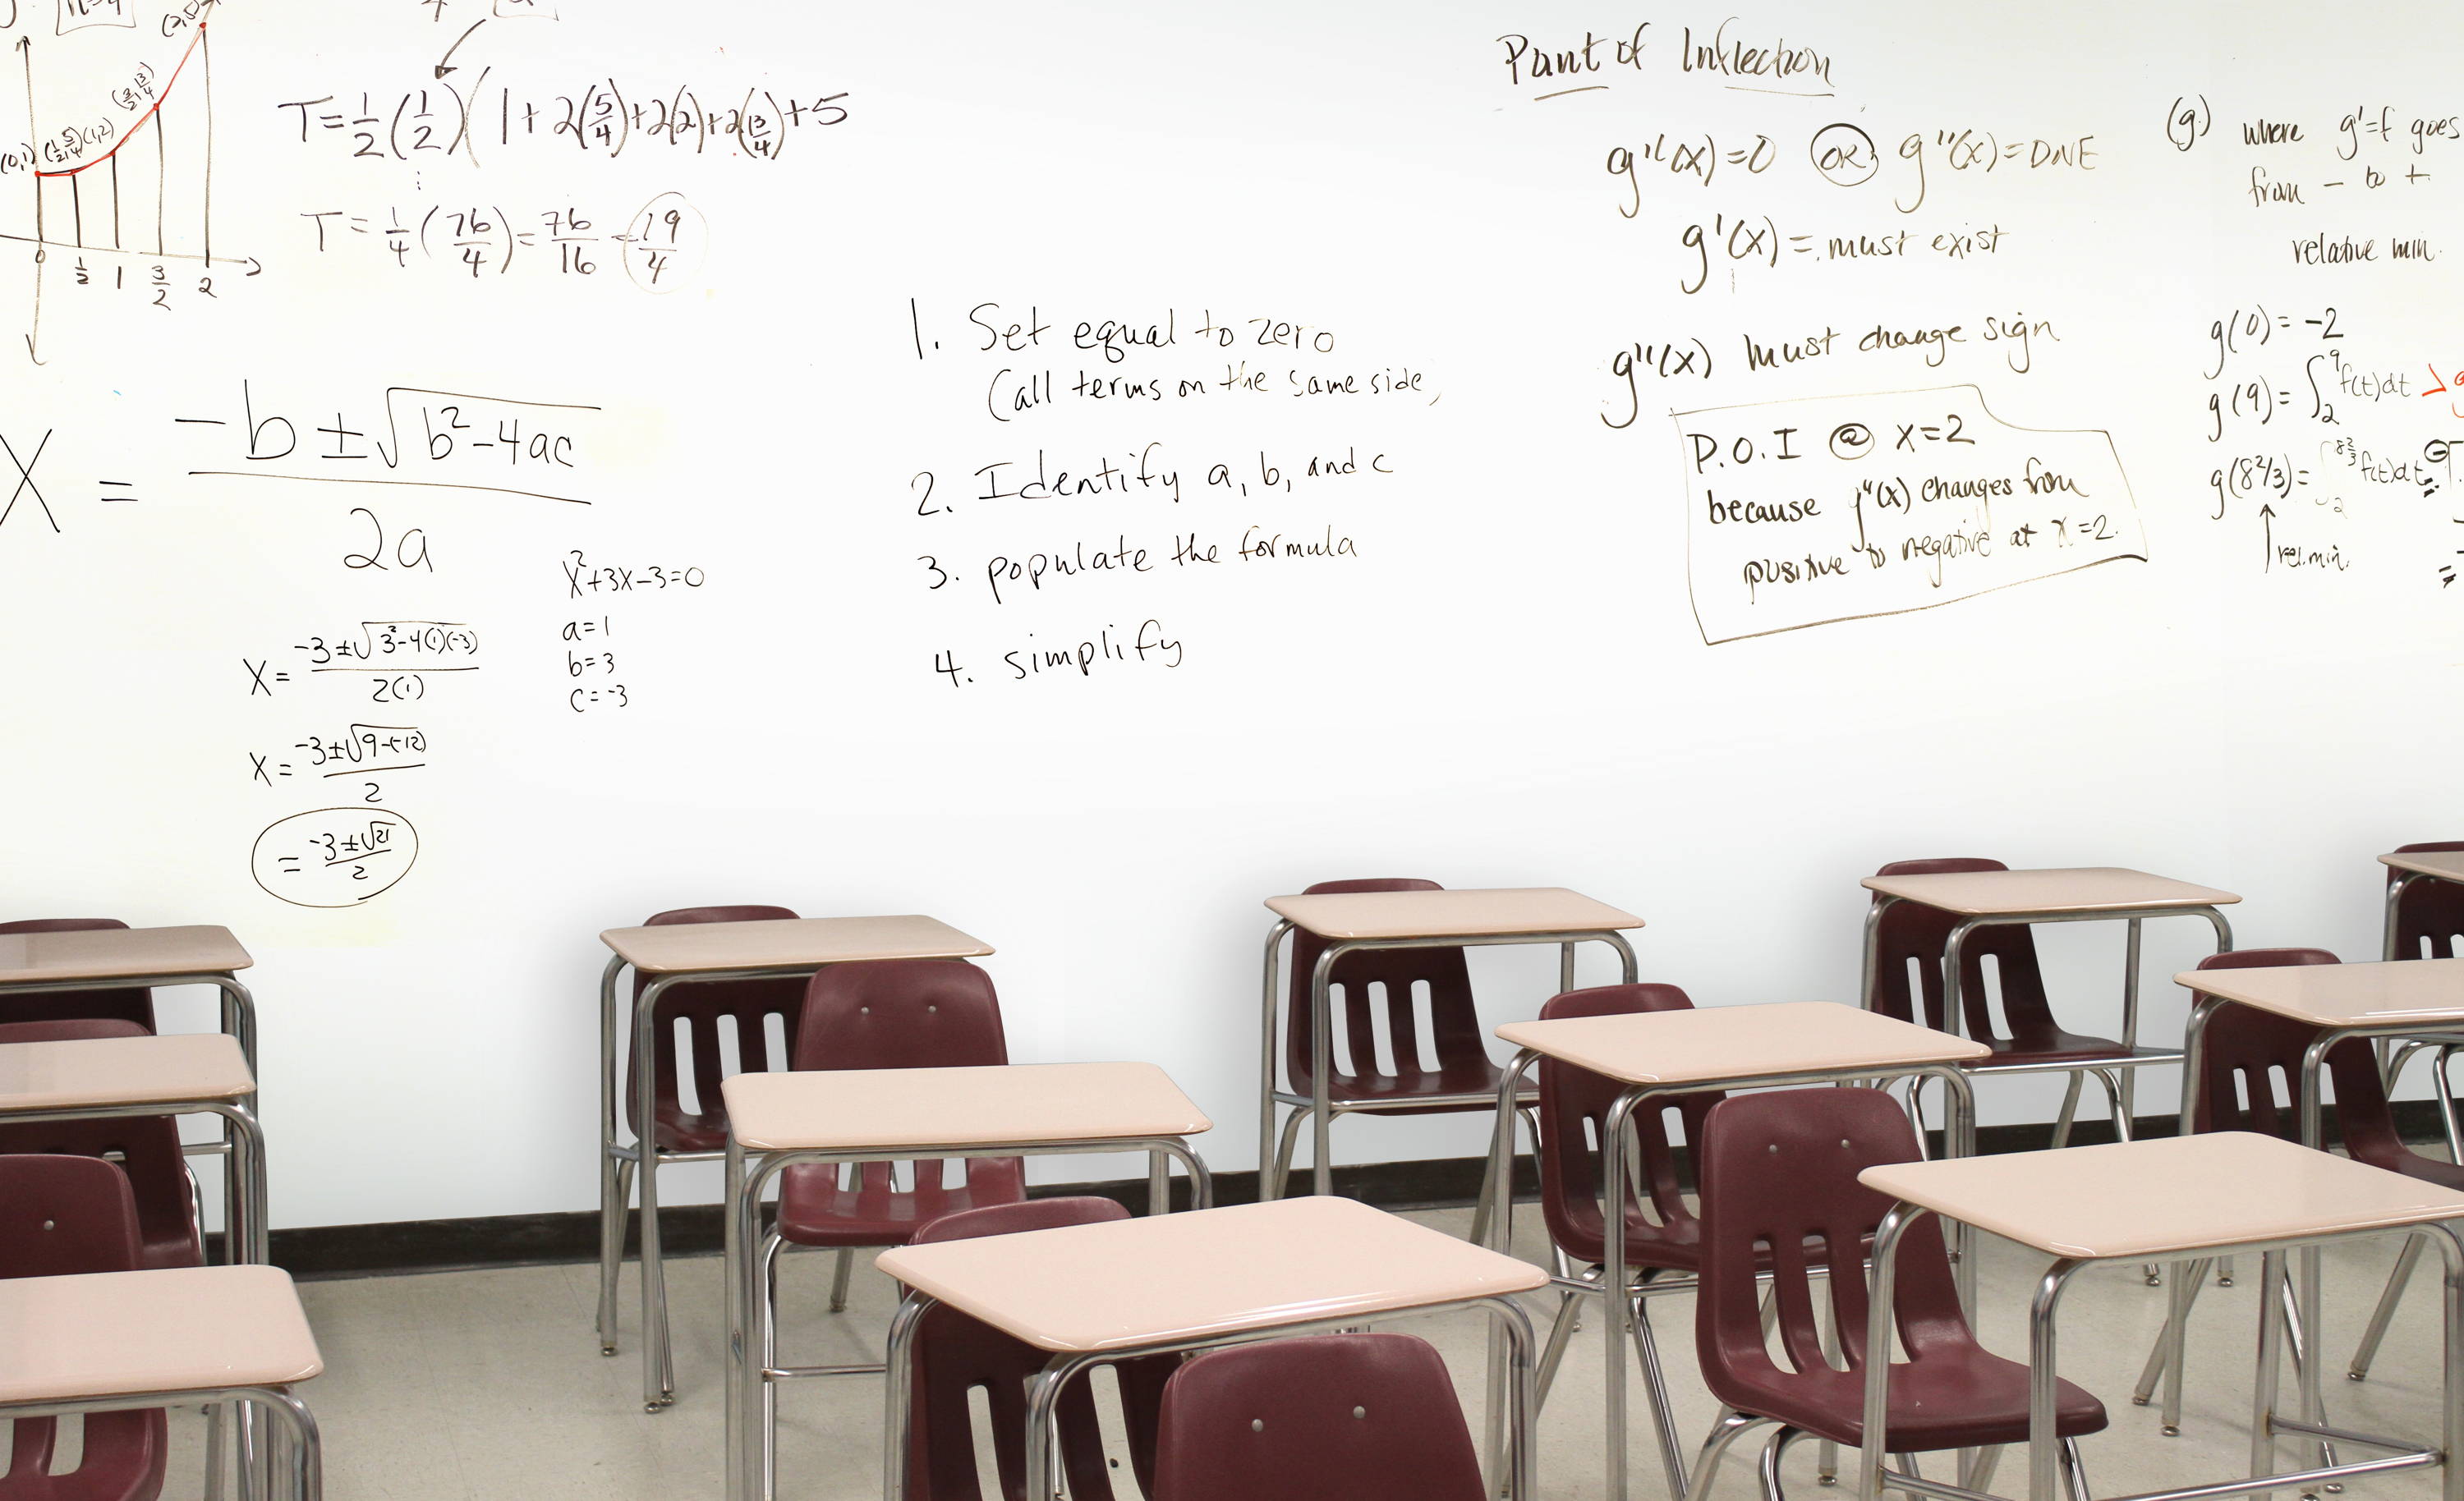 IdeaPaint dry erase paint is used in a classroom to enhance learning